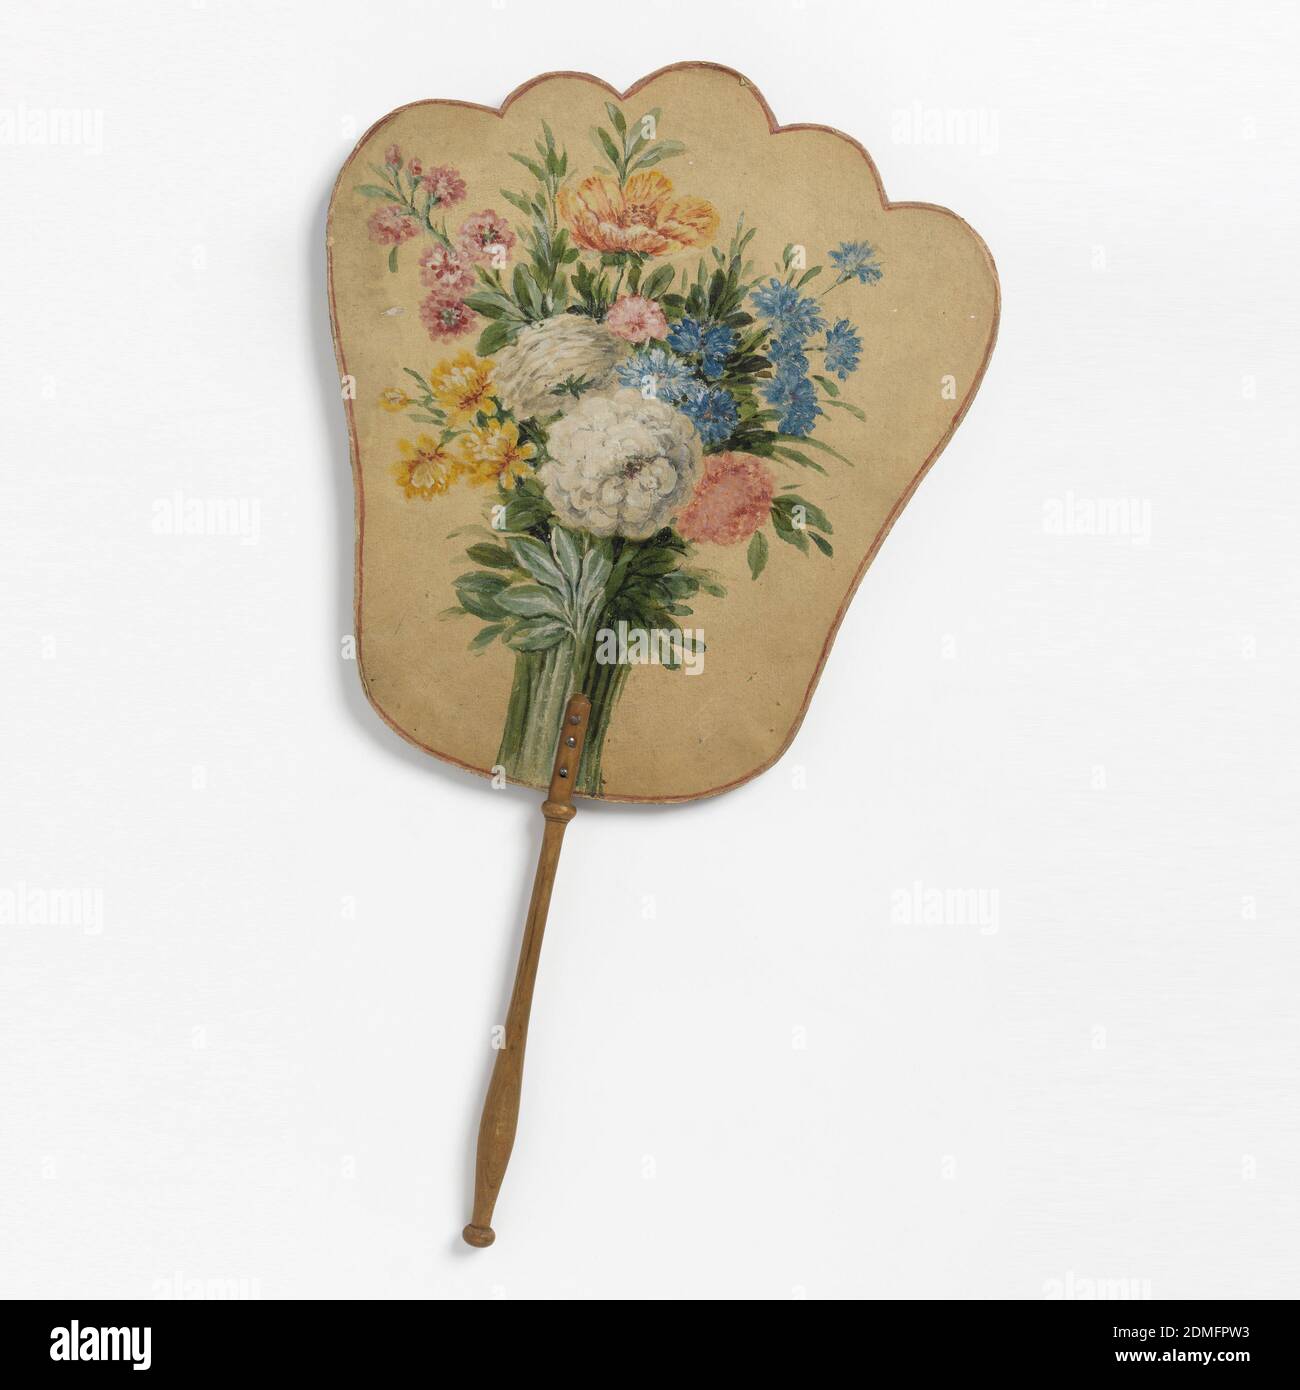 Handscreen, Painted paper leaf, turned wood handle, Handscreen with a hand-painted paper leaf. Obverse: a colorful bouquet of flowers. Reverse: blue trumpet shaped flowers resembling Gentiana Acaulis. Turned wood handle., France, England, mid- 18th century, costume & accessories, Handscreen Stock Photo